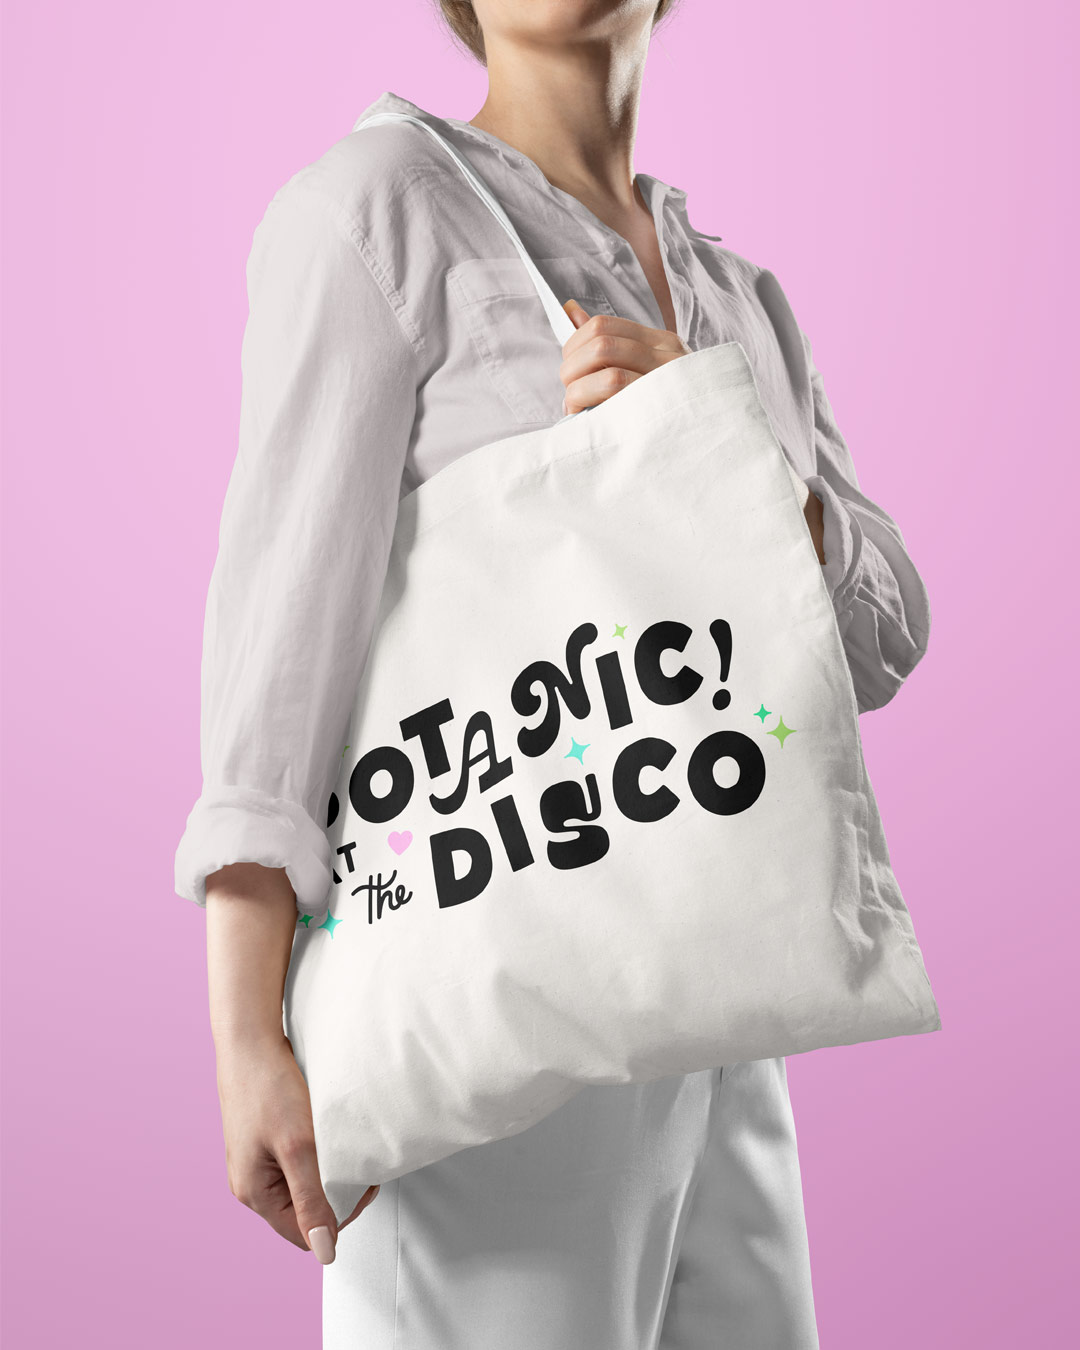 Tote bag for Botanic! at the Disco is a funky plant shop based in Seattle - designed by Wiltshire-based graphic designer, Kaye Huett